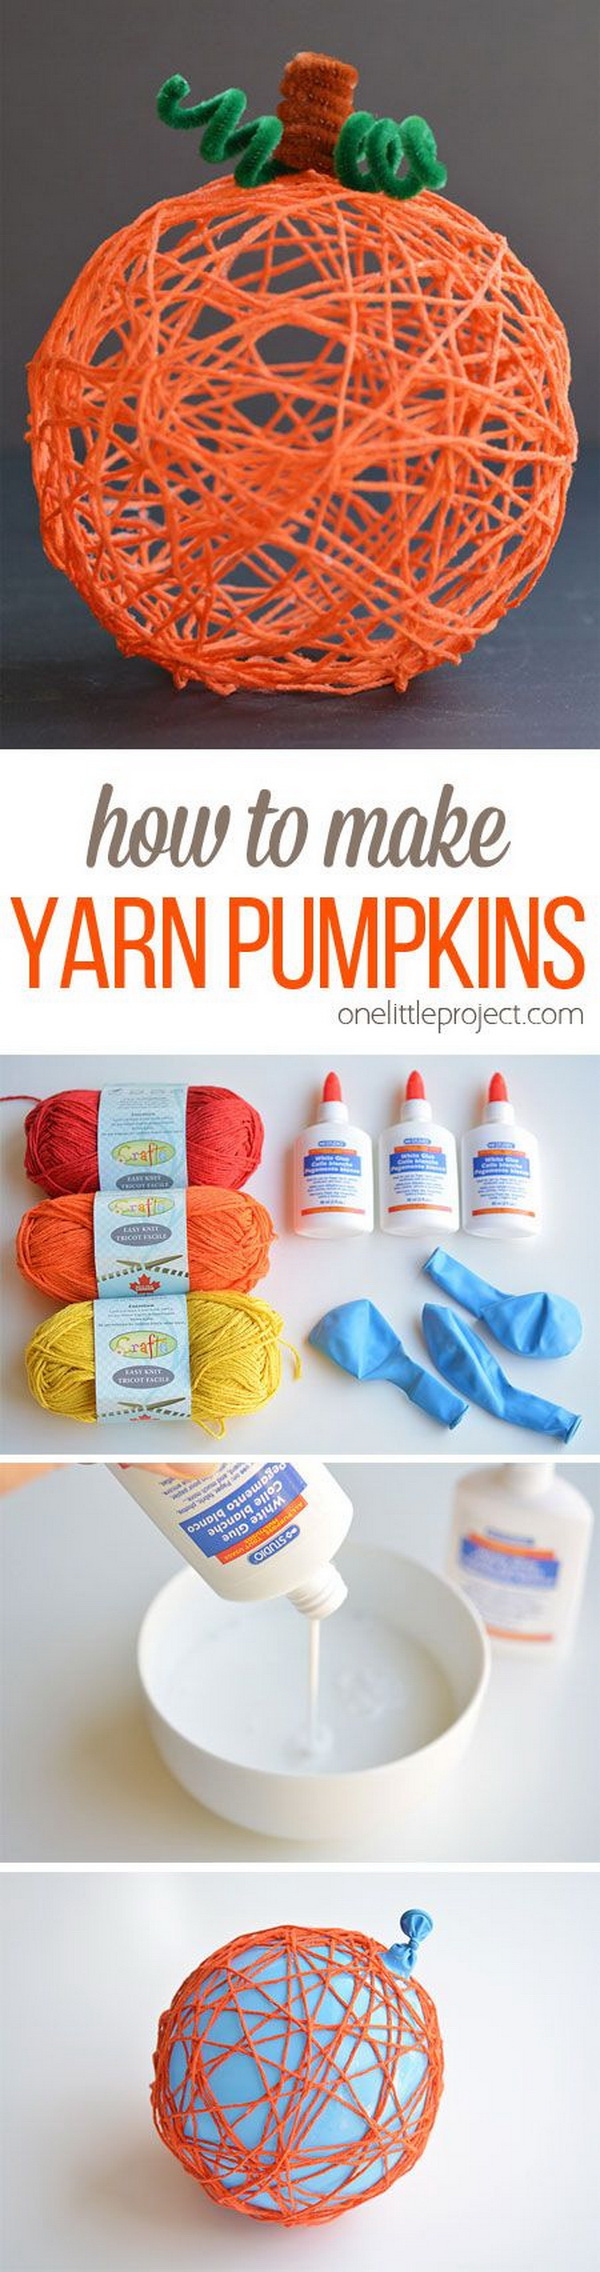 Yarn Pumpkins Using Balloons. Create this unique and lovely pumpkin with yarn and a balloon! They'd make a BEAUTIFUL centerpiece or mantle decoration, or you could even use them for Halloween!